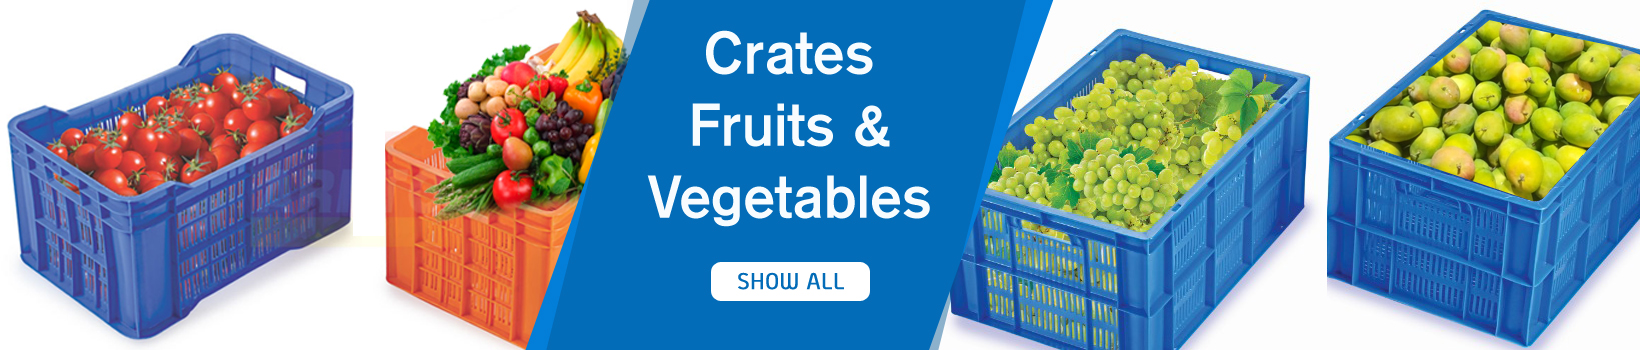 Crates Fruits and Vegetables